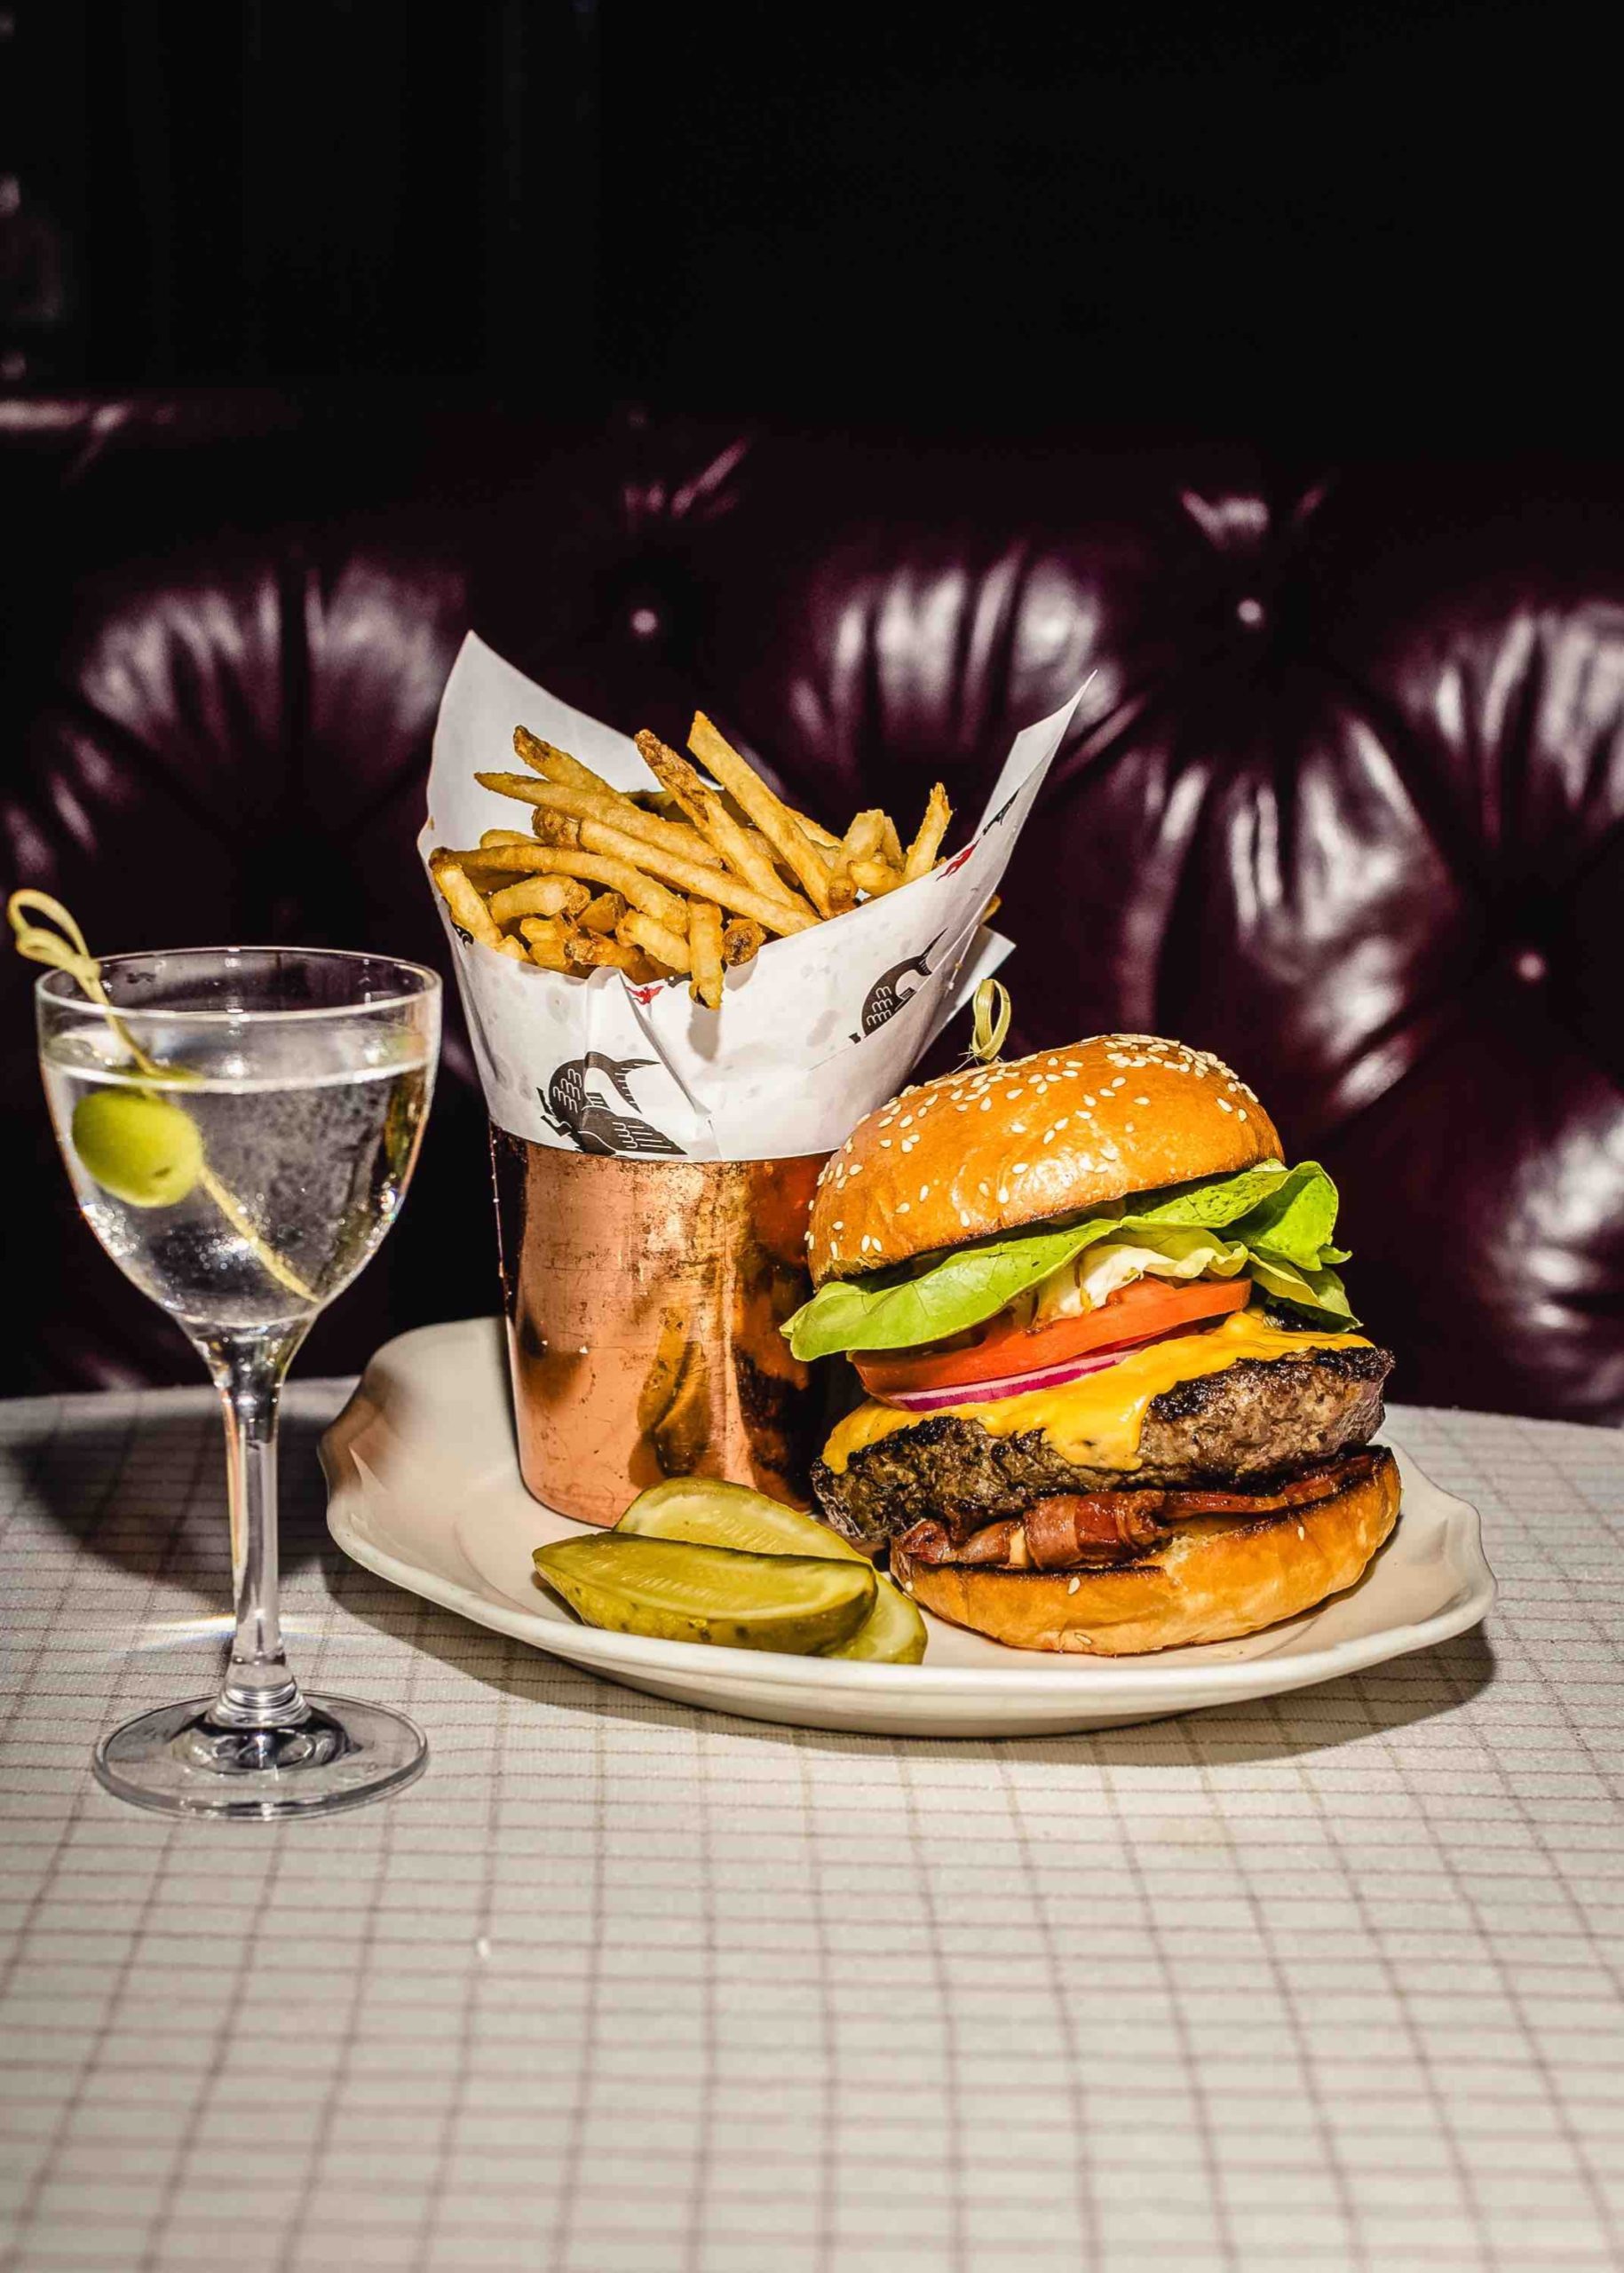 The Standard Grill Has Has The Best Burger Menu For The Hottest, Juiciest, Tenderest Burgers In The US